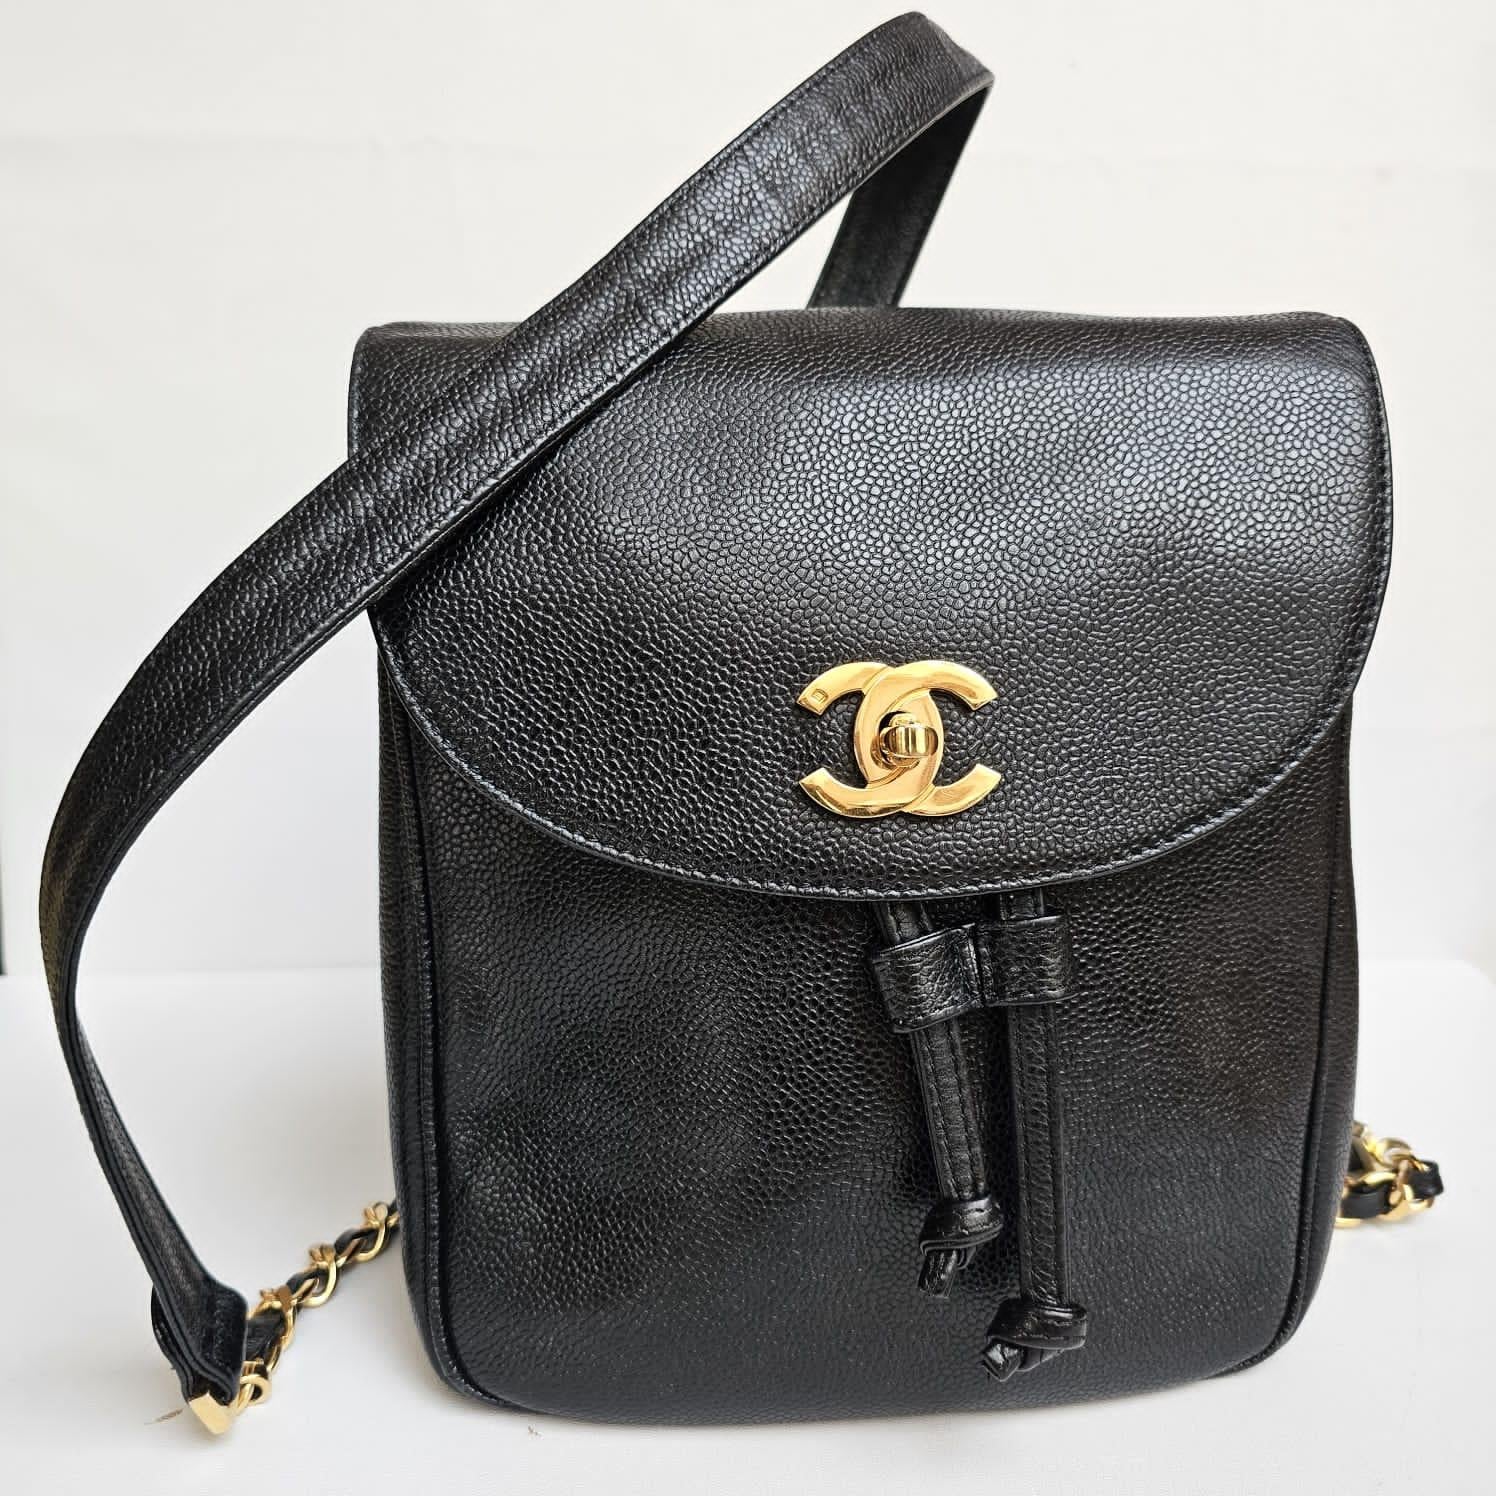 Beautiful vintage classic chanel backpack in black caviar leather. Overall still in very good vintage condition, missing its holo sticker. Comes as is with replacement dust bag.